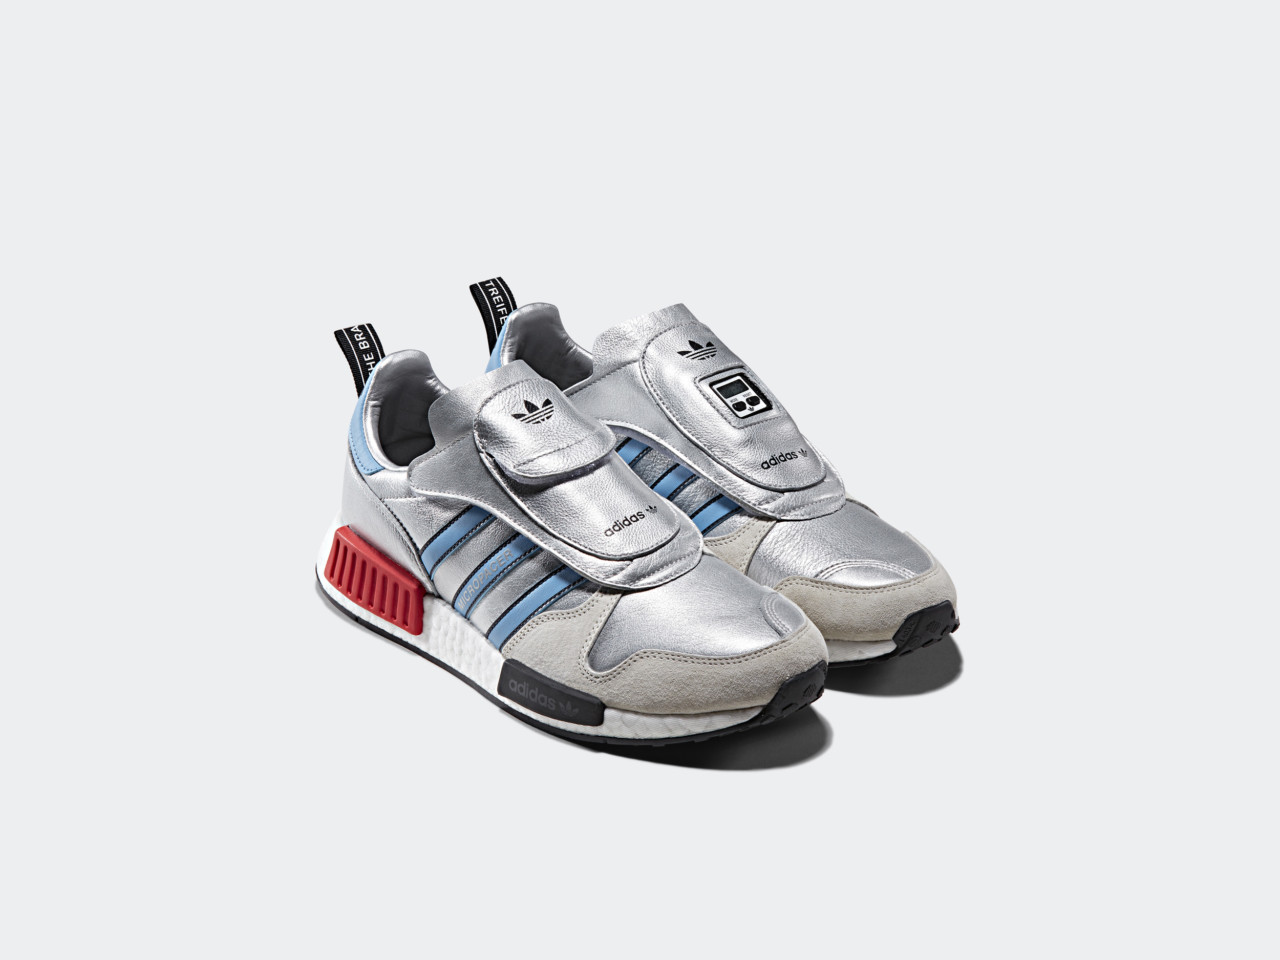 Agua con gas rural Muscular adidas Originals Never Made Collection Connects Past to Present